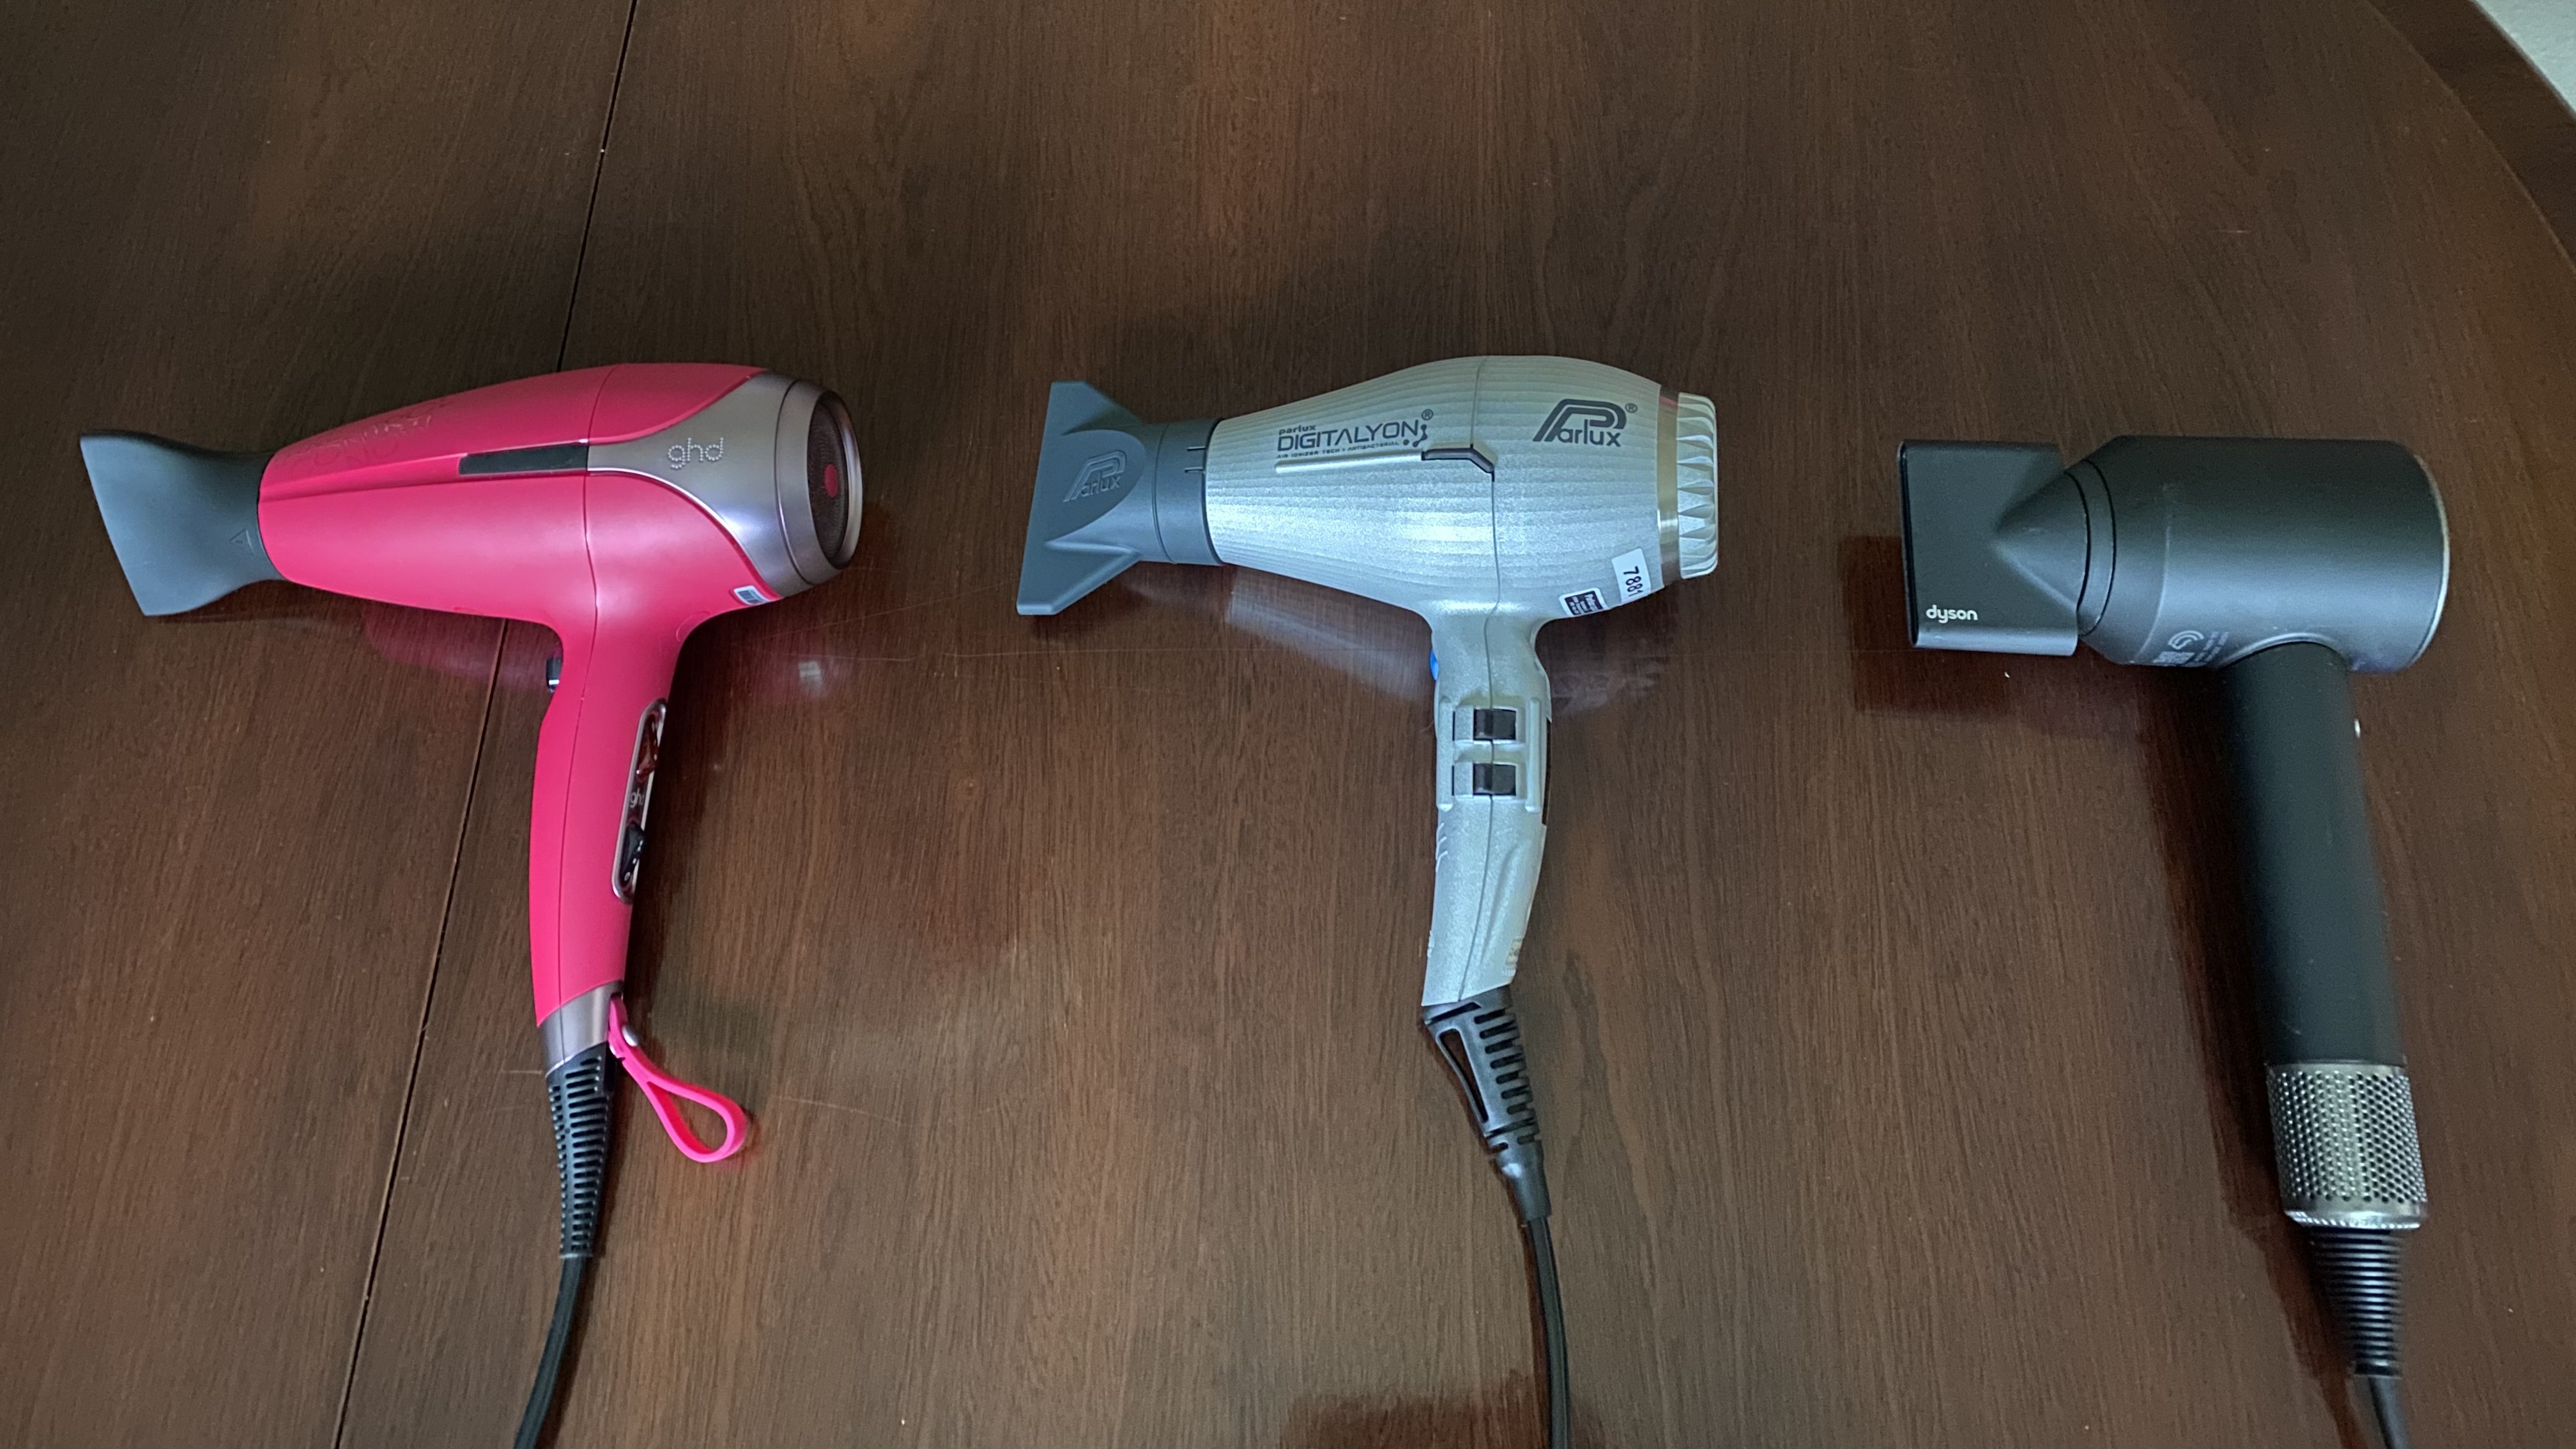 Parlux comparison with other compact hair dryers